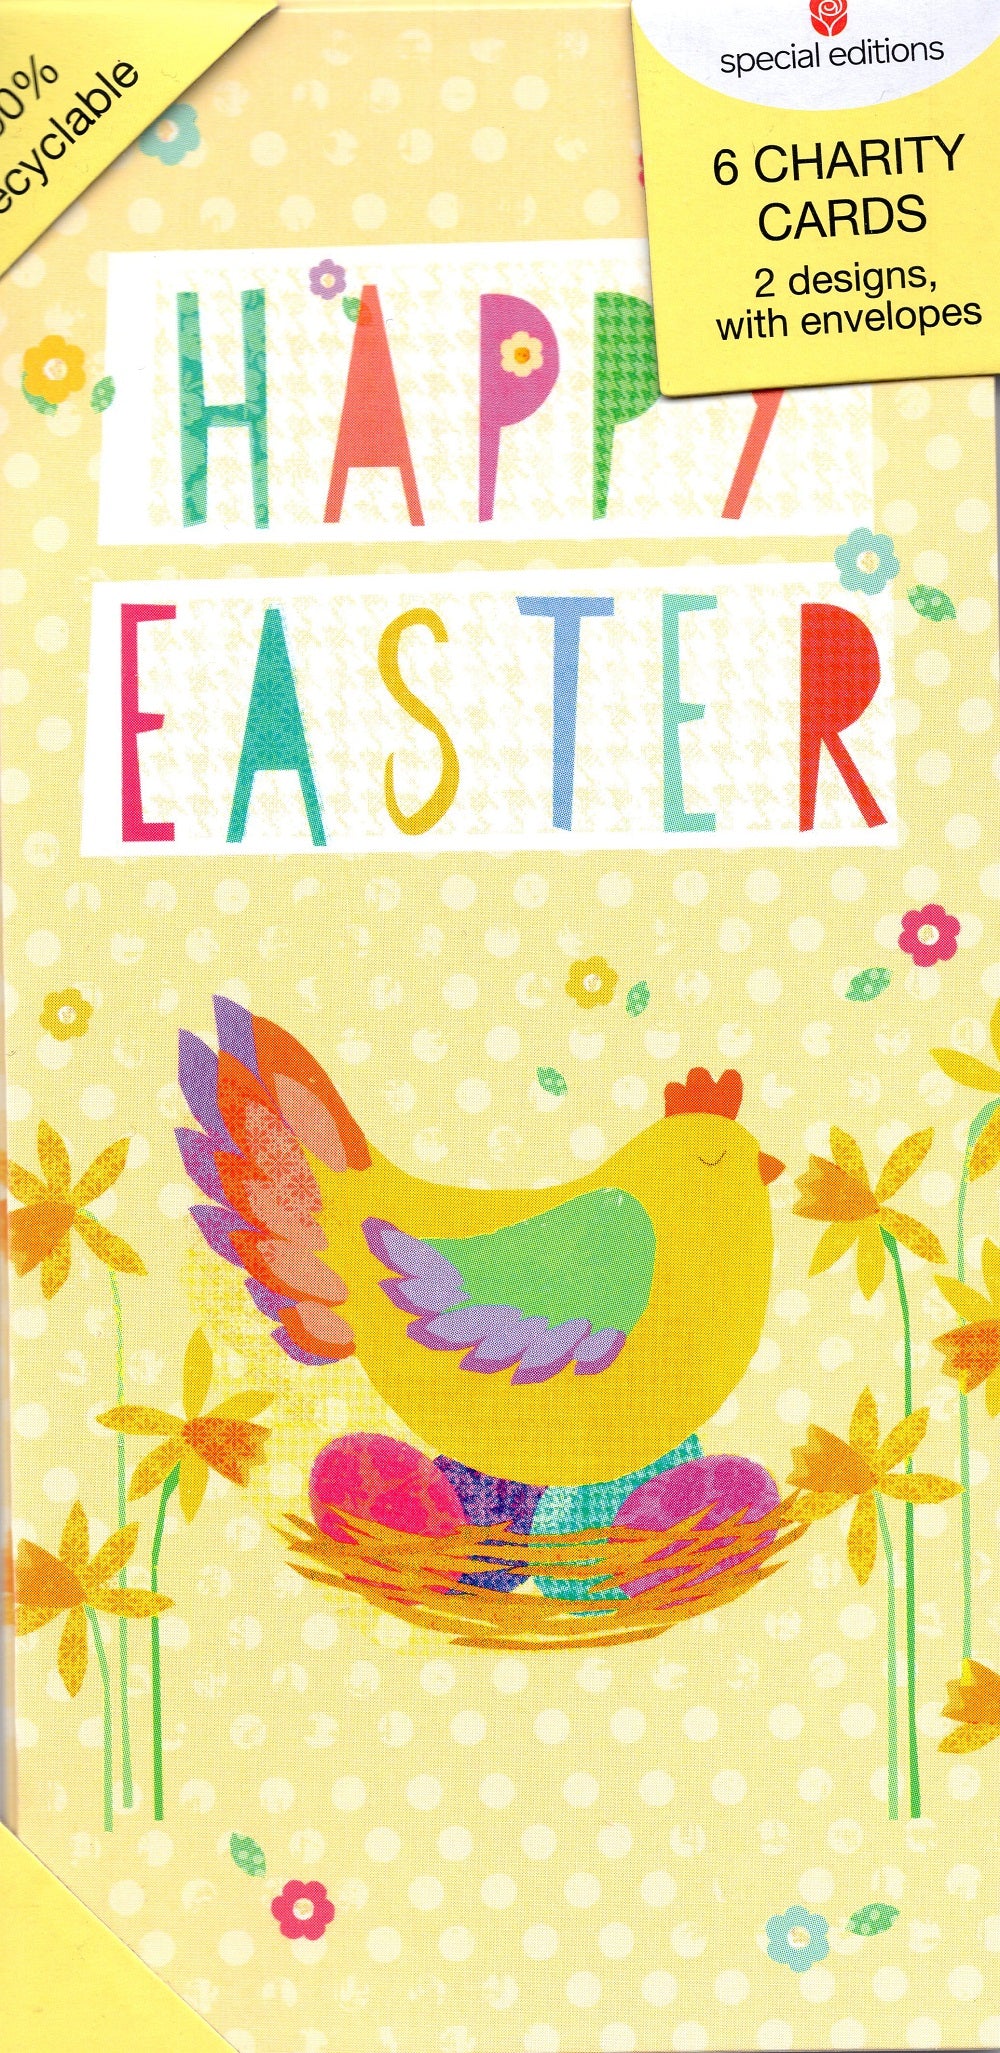 Pack of 6 RSPCA Charity Easter Greeting Cards